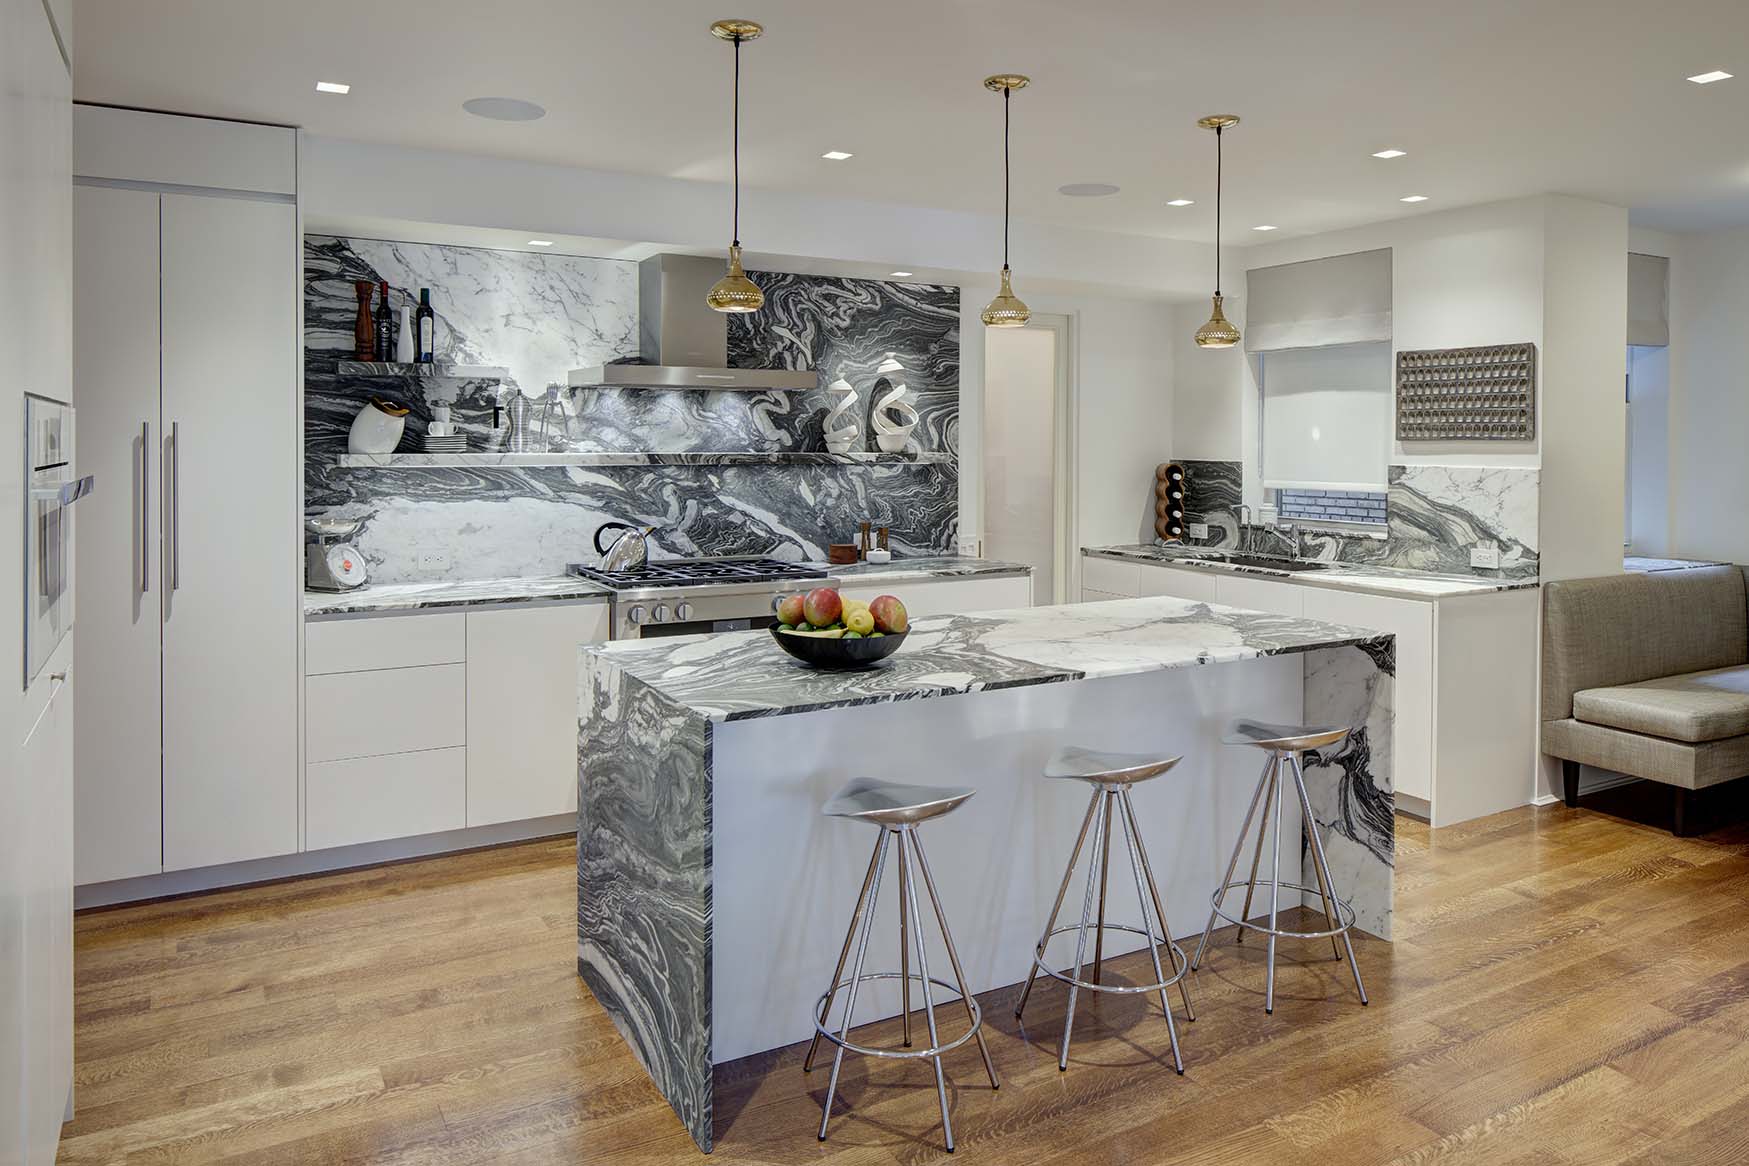 Townhouse Kitchens - NYDC